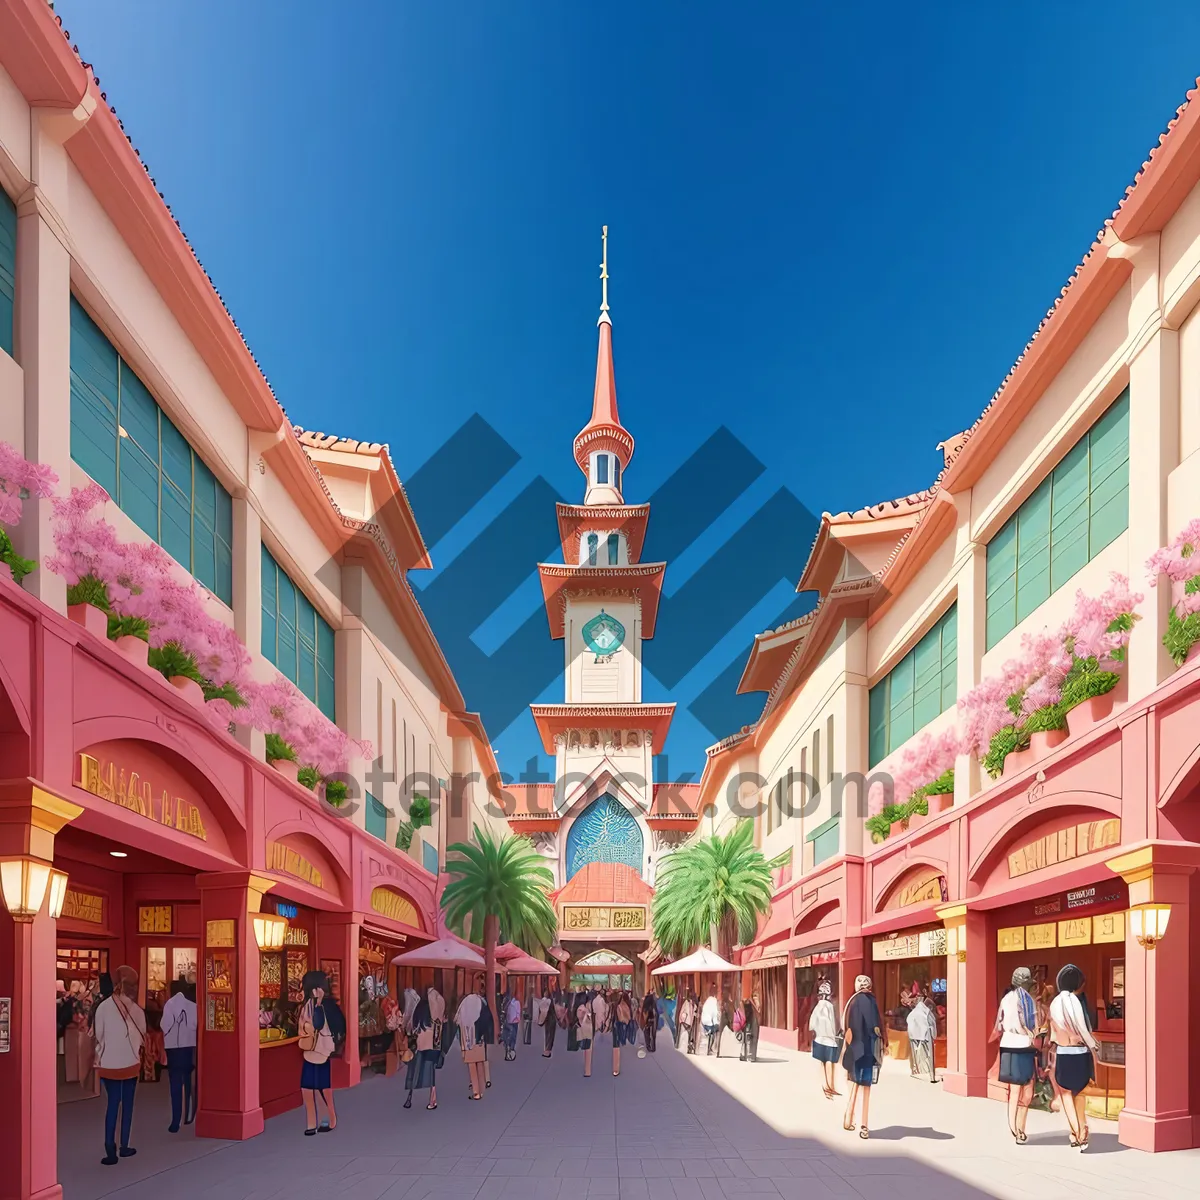 Picture of Charming Historic Town Square with Architectural Landmarks